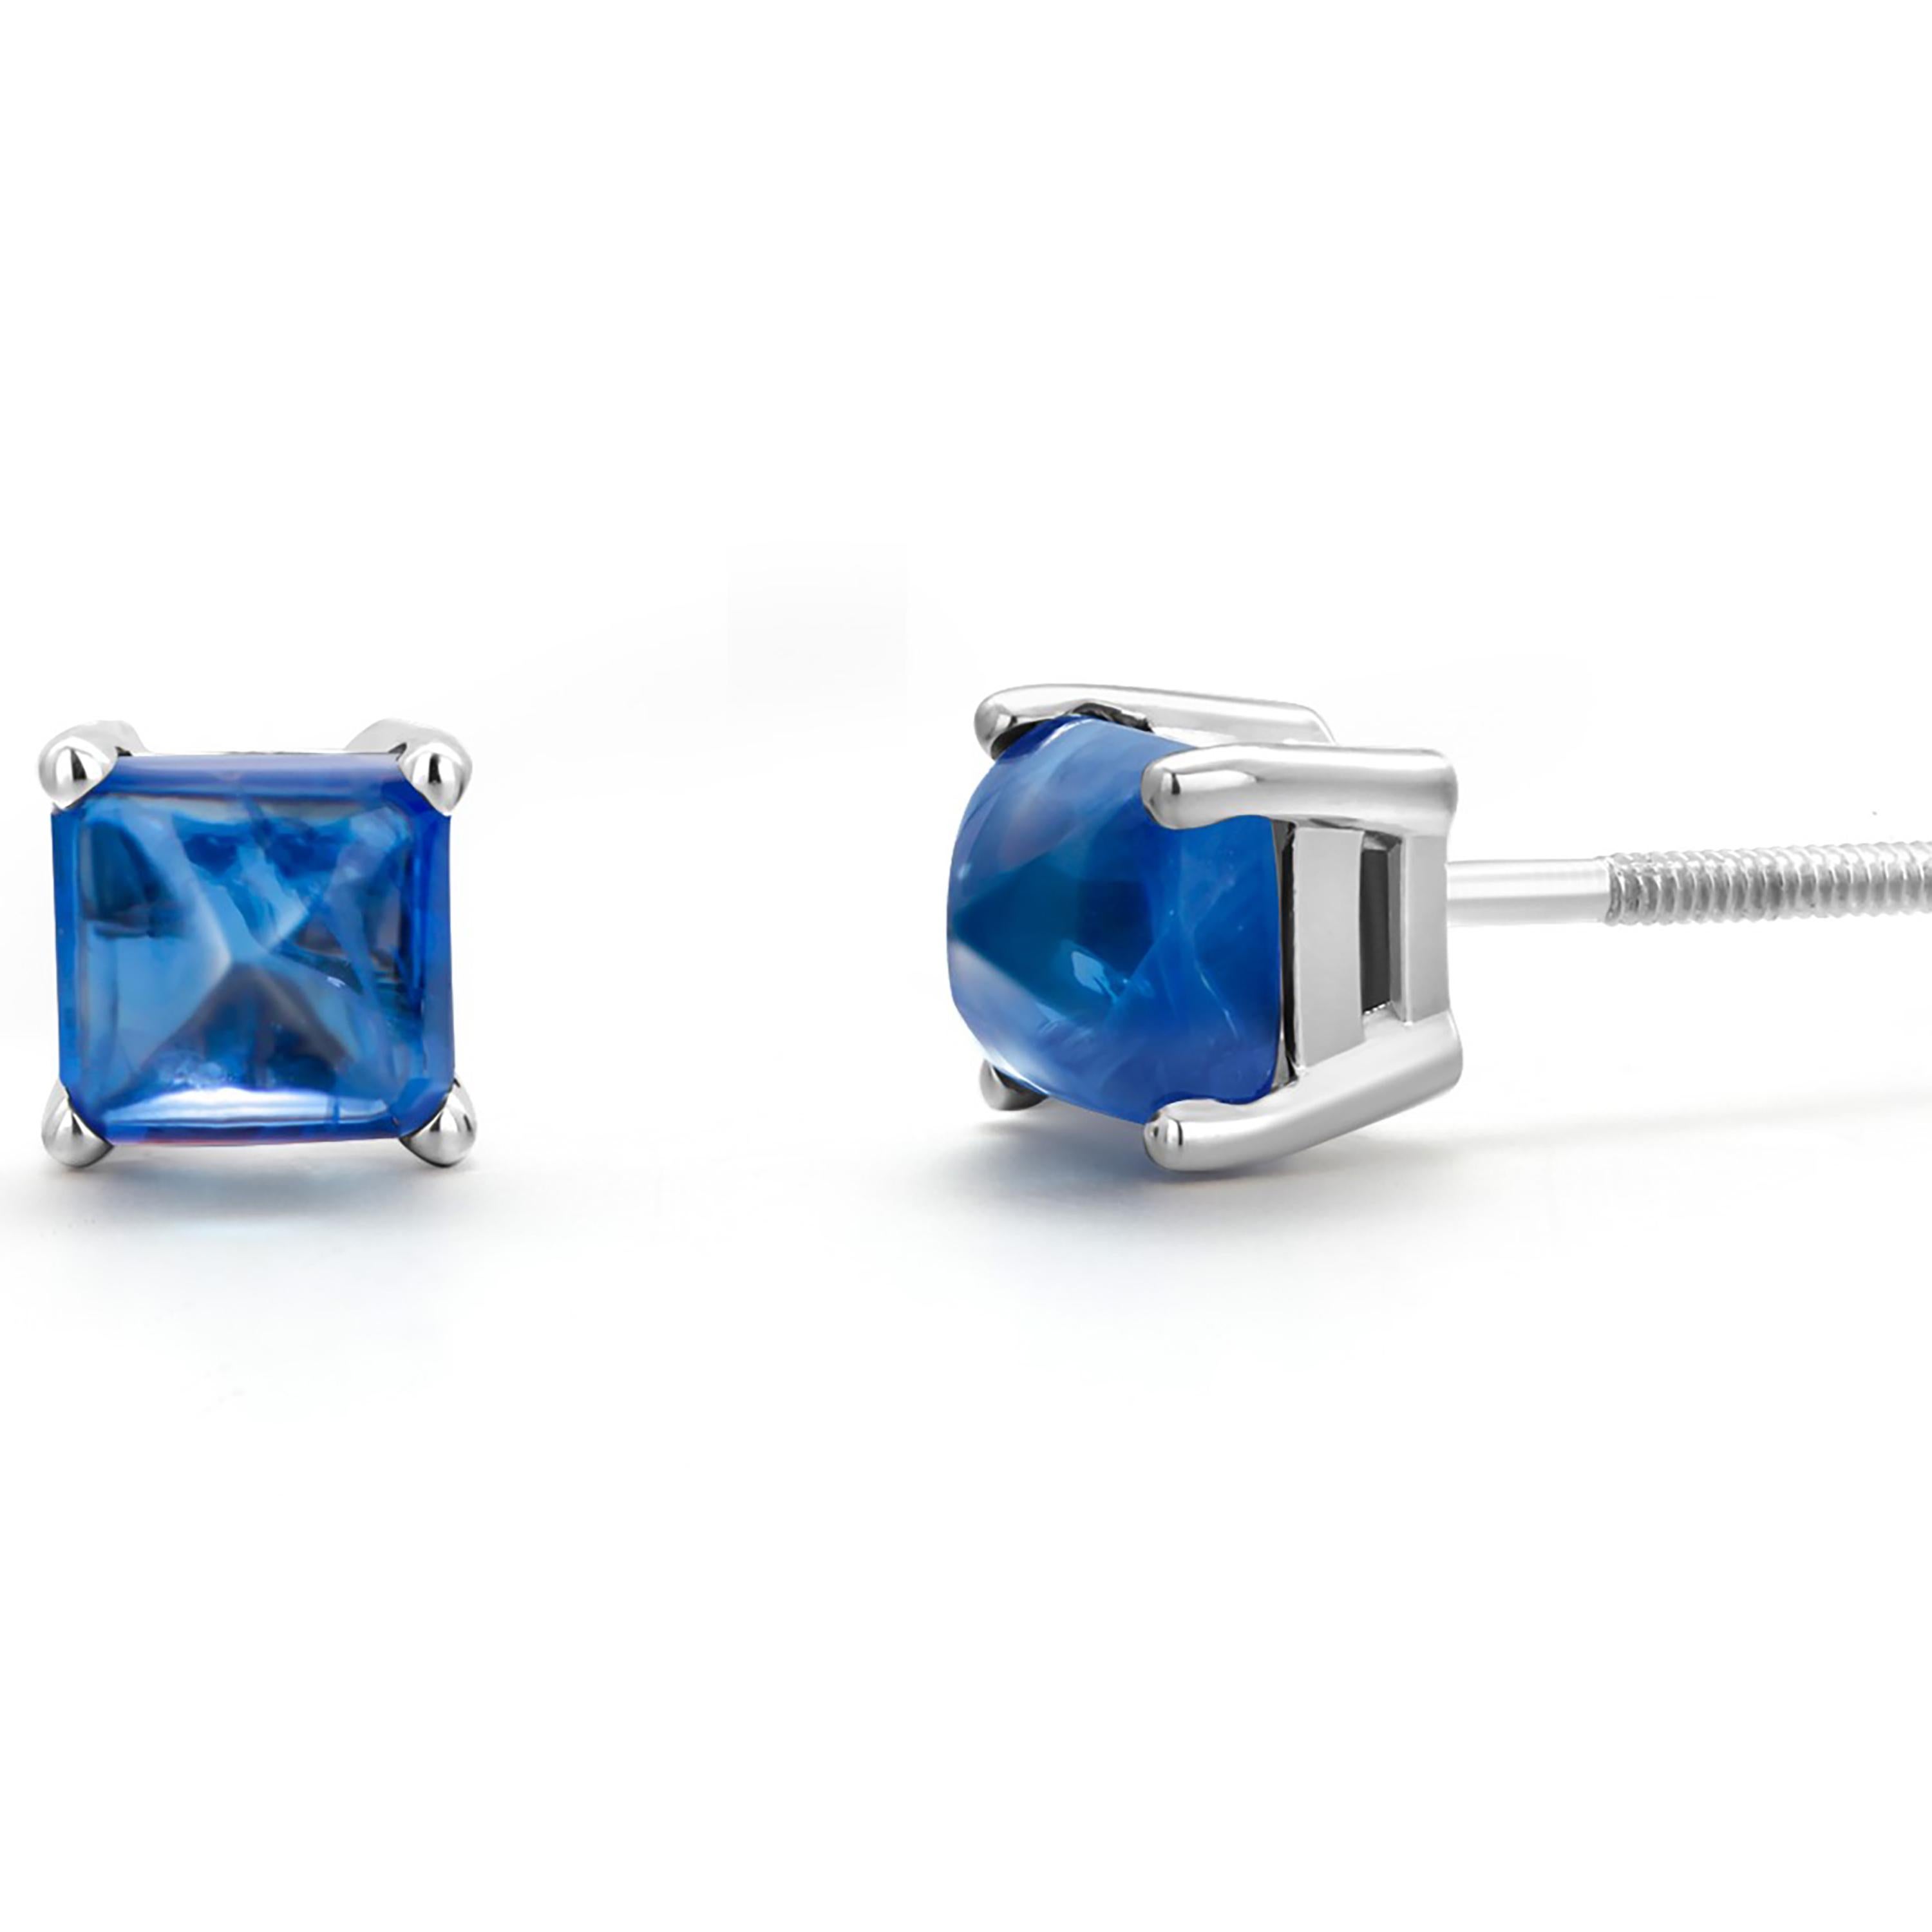 Sugarloaf Cabochon Sugarloaf Ceylon Cabochon Sapphire 2.70 Carat 0.25 Inch White Gold Stud Earrings For Sale